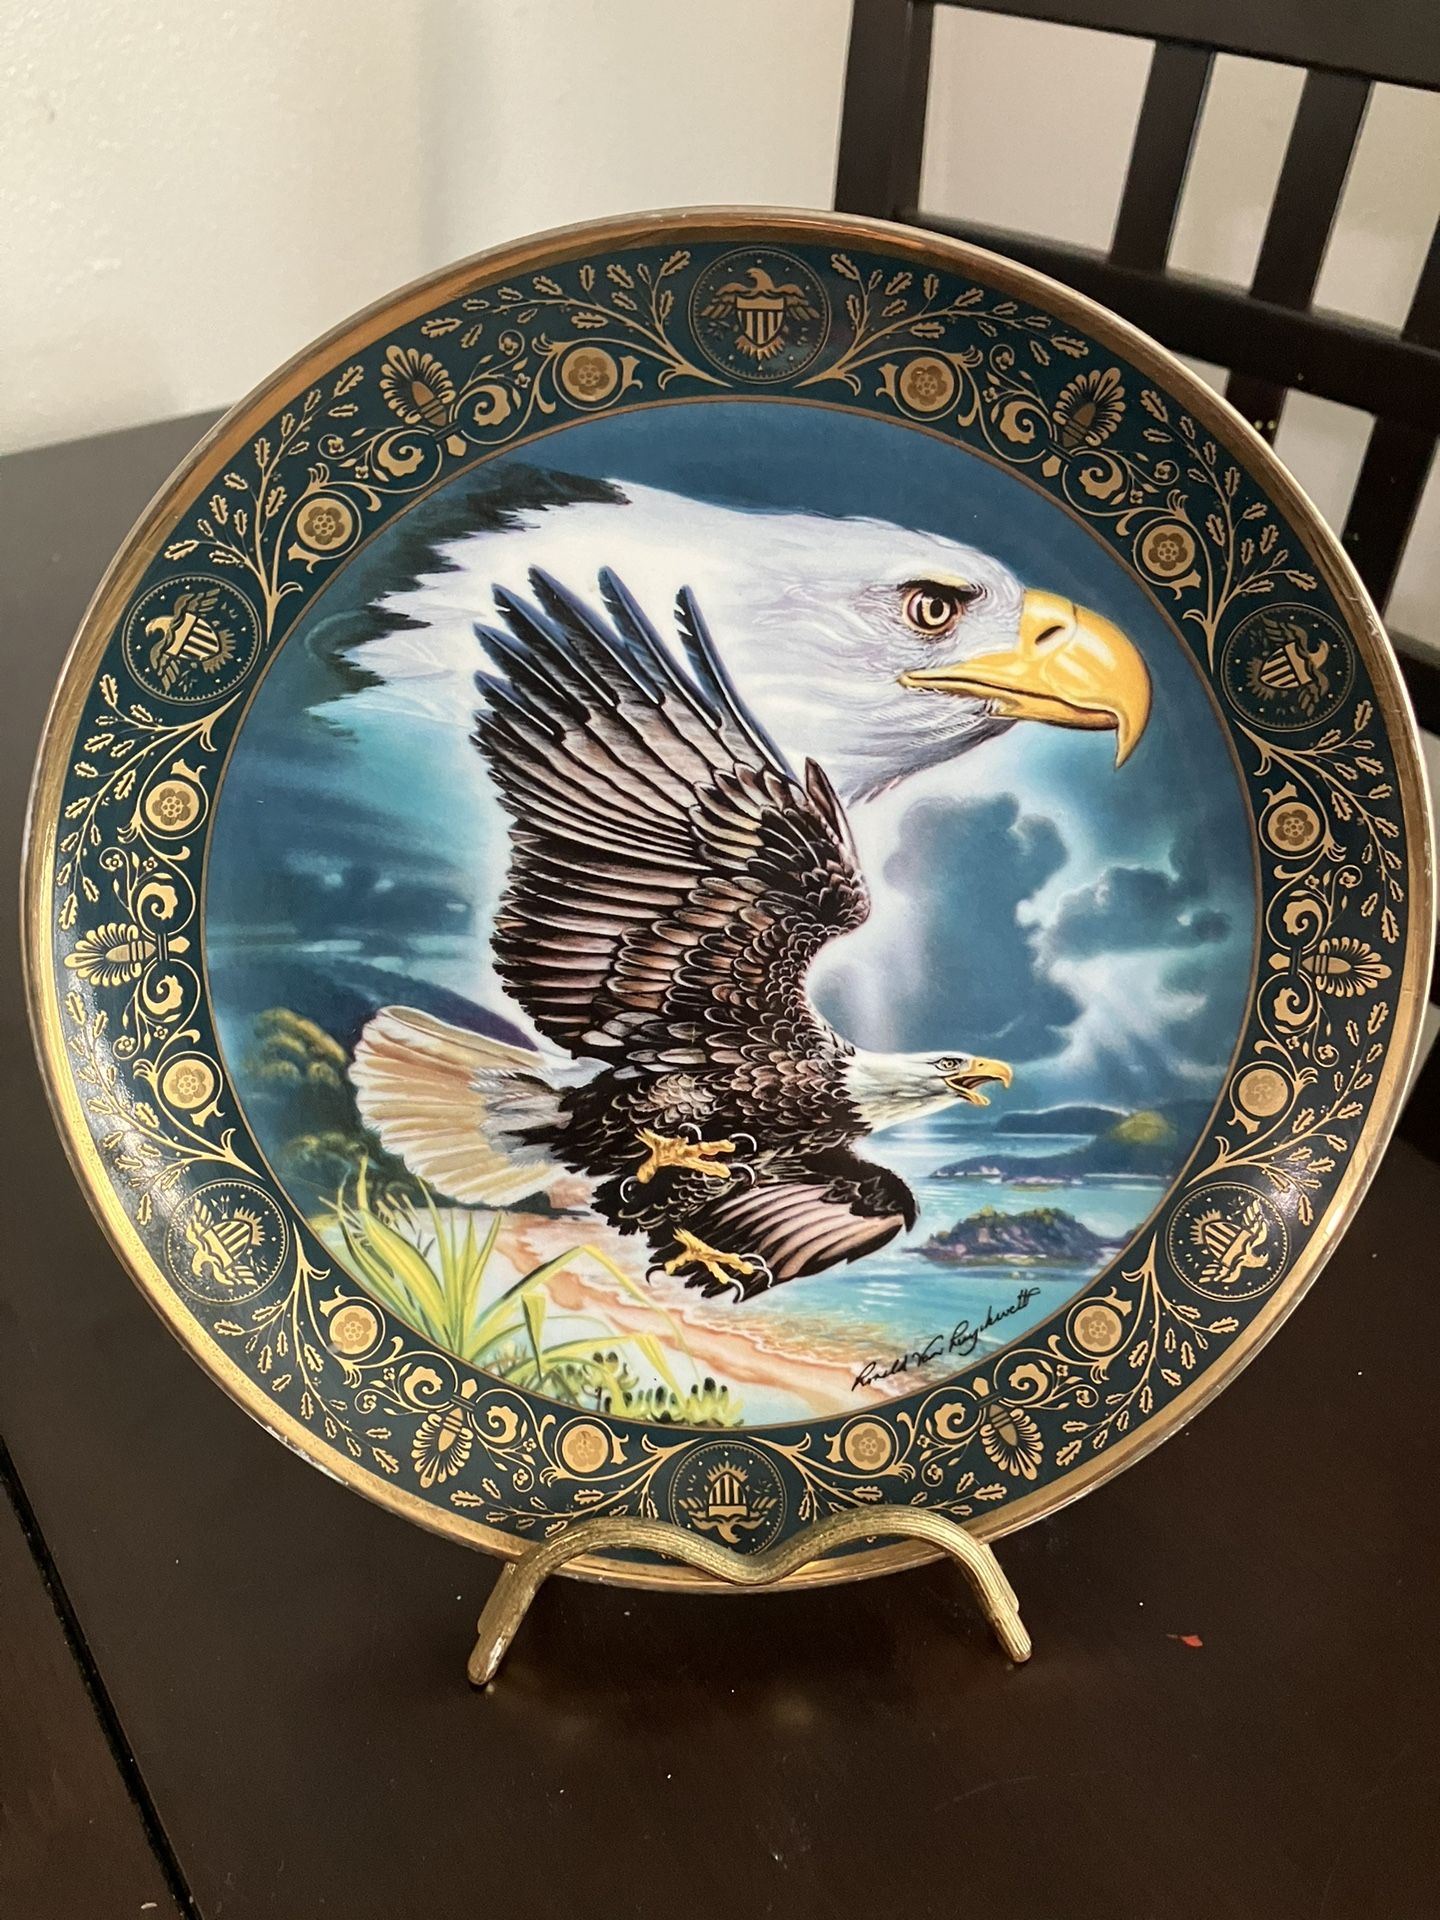 PRESERVATION OF FREEDOM Collectors Plate: Ronald Van Ruyckevelt Royal Doulton